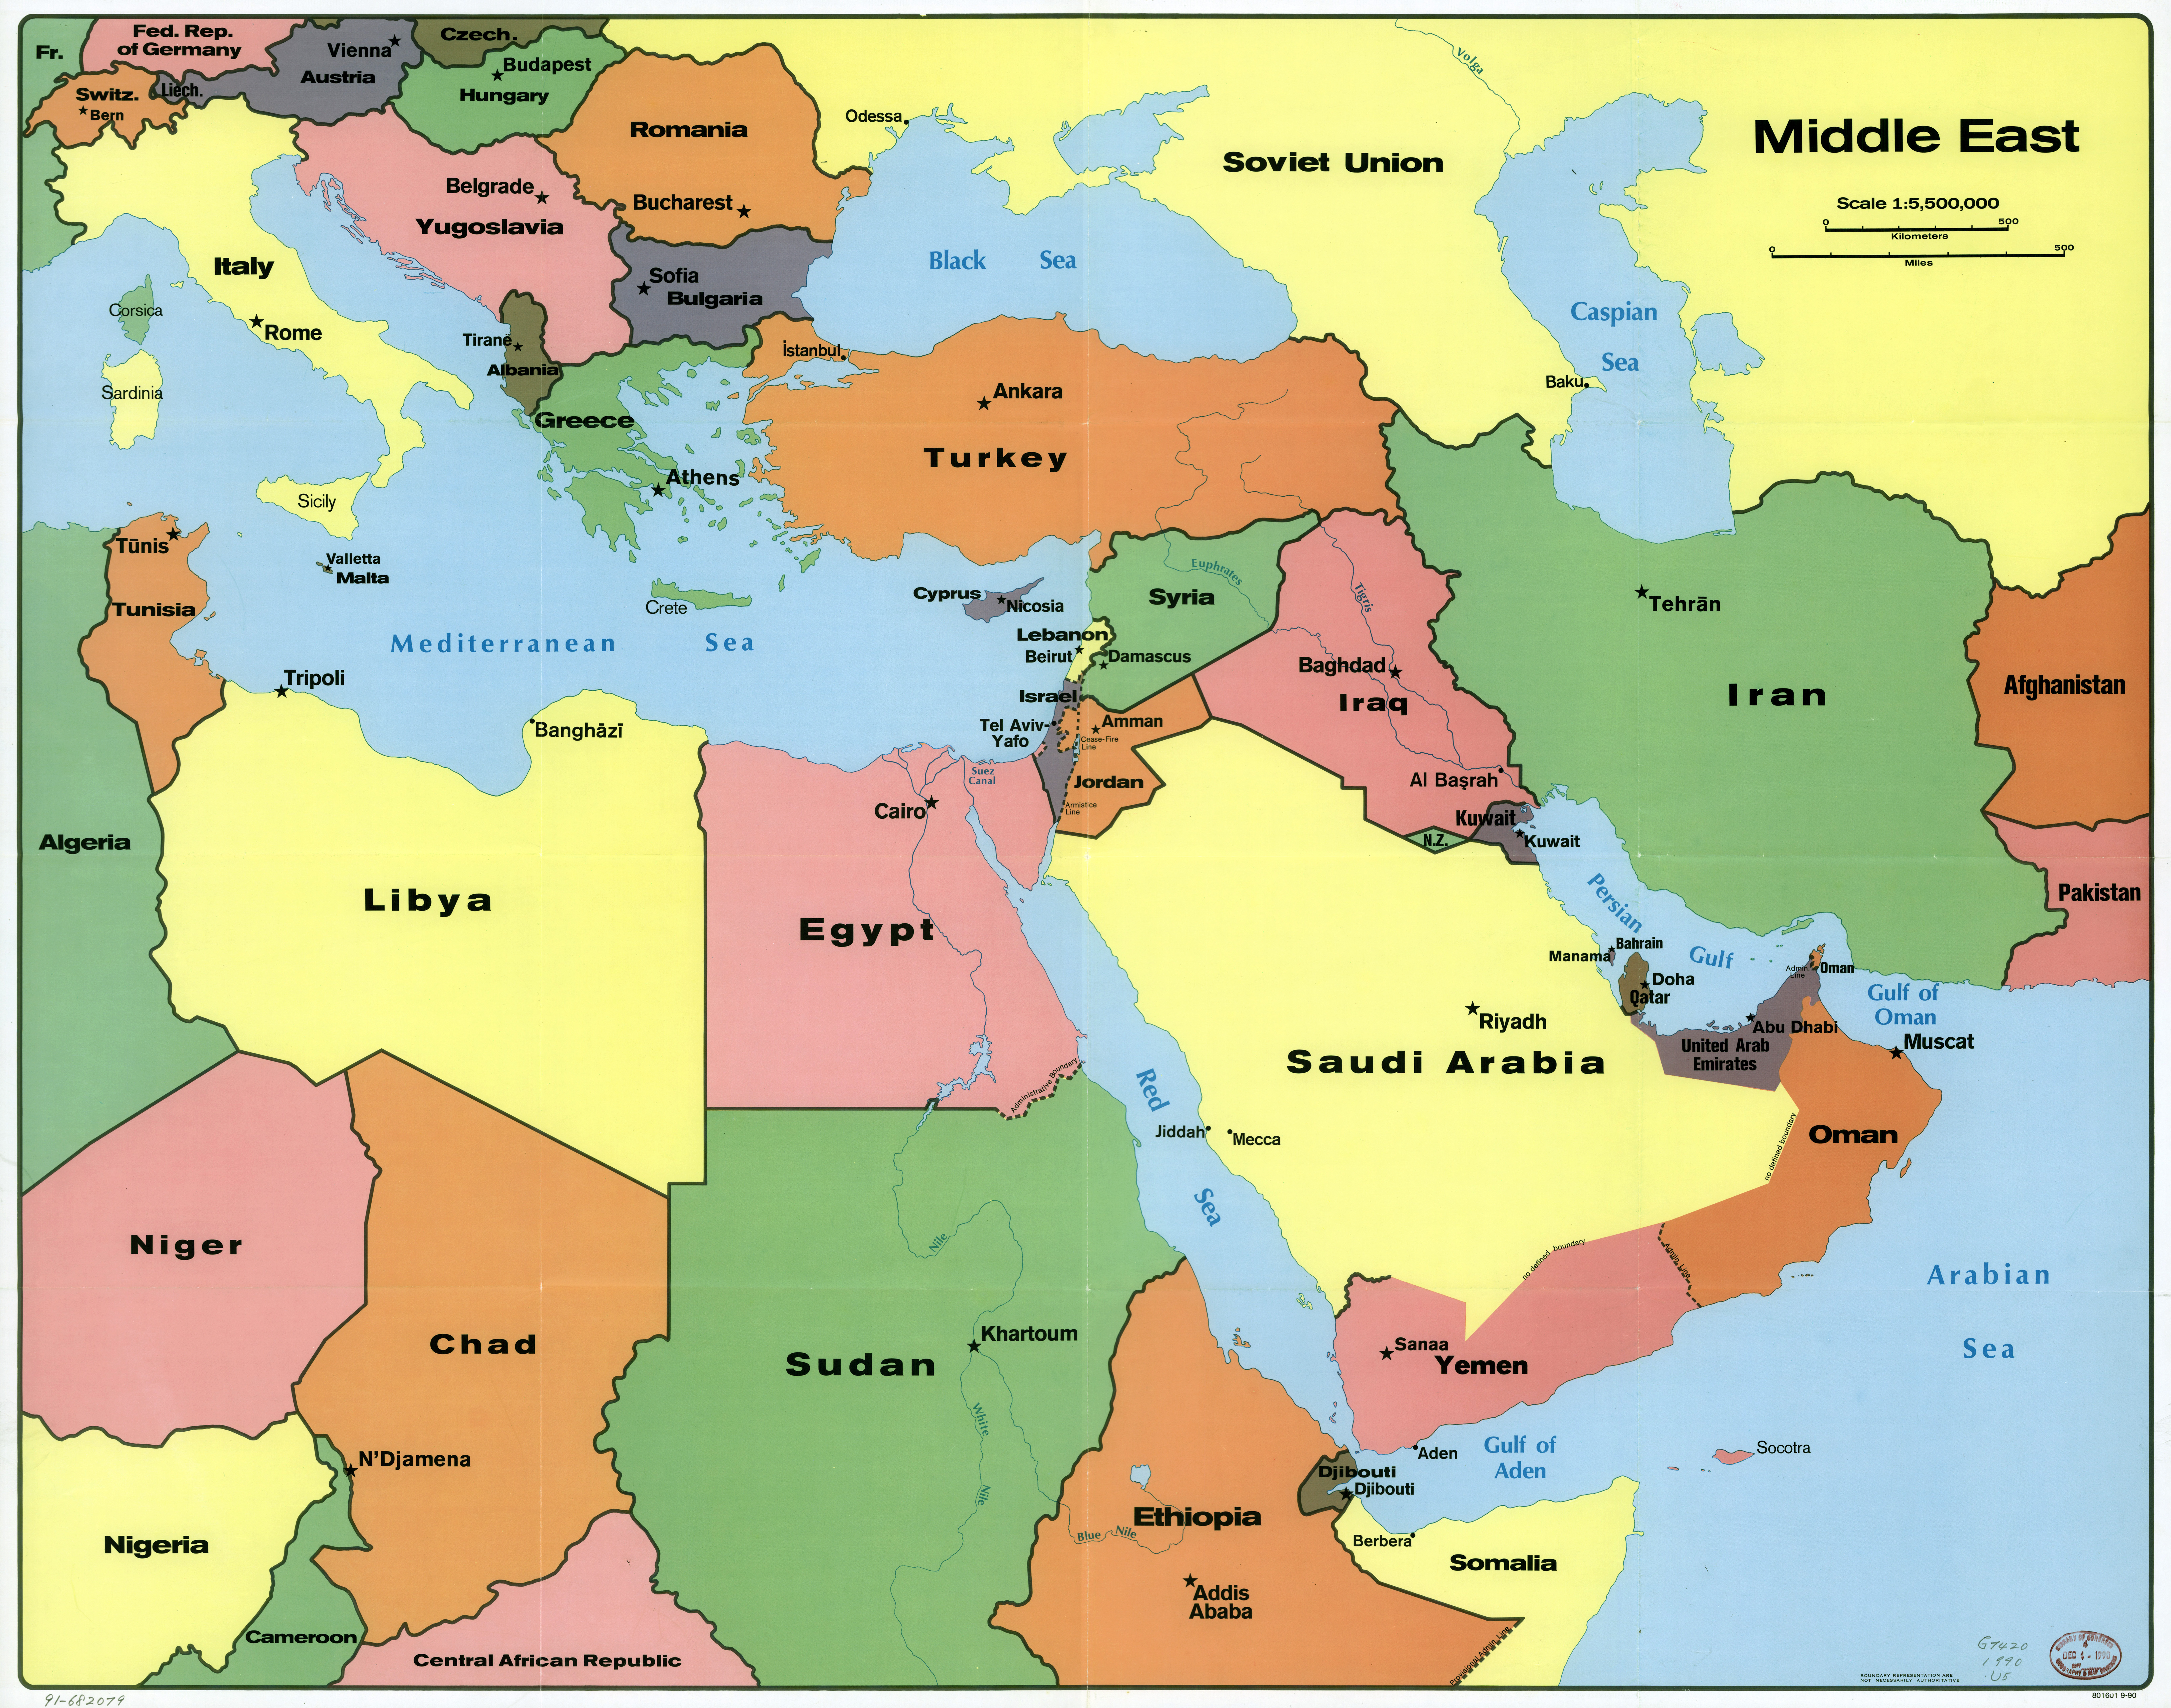 the middle east political map Large Scale Political Map Of The Middle East With Capitals 1990 the middle east political map